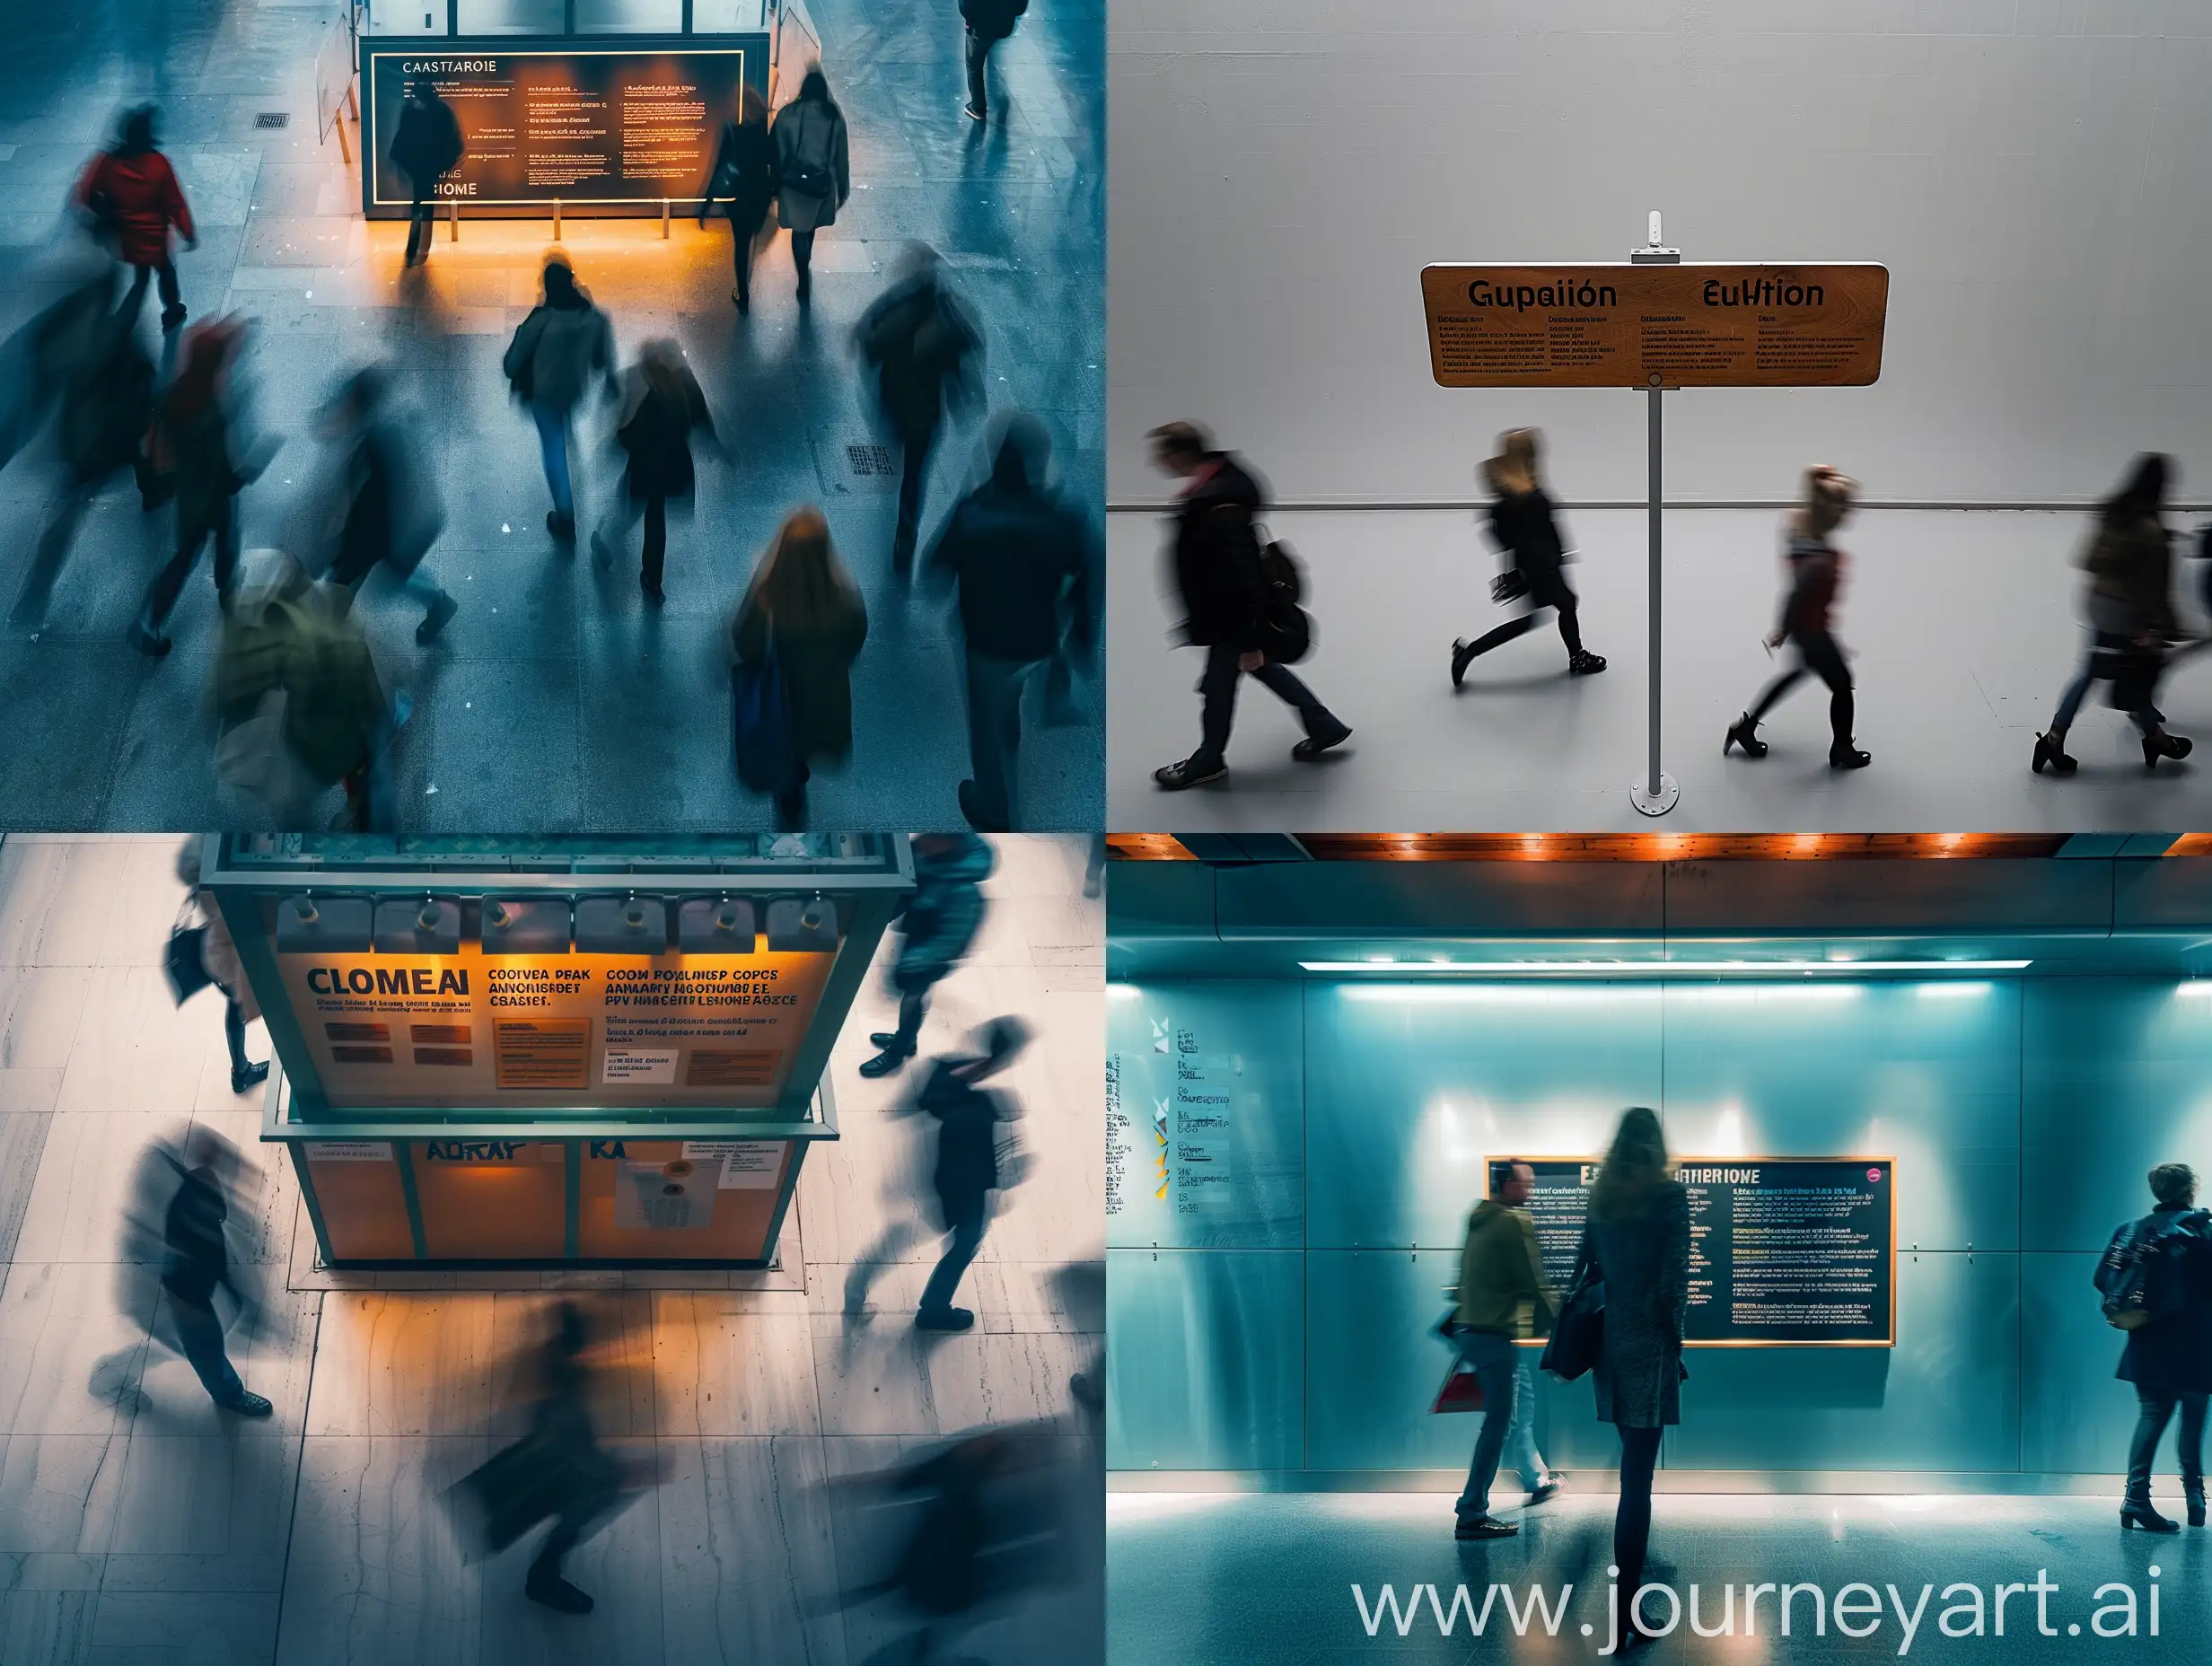 HighQuality-Long-Exposure-Exhibition-Board-with-Detailed-People